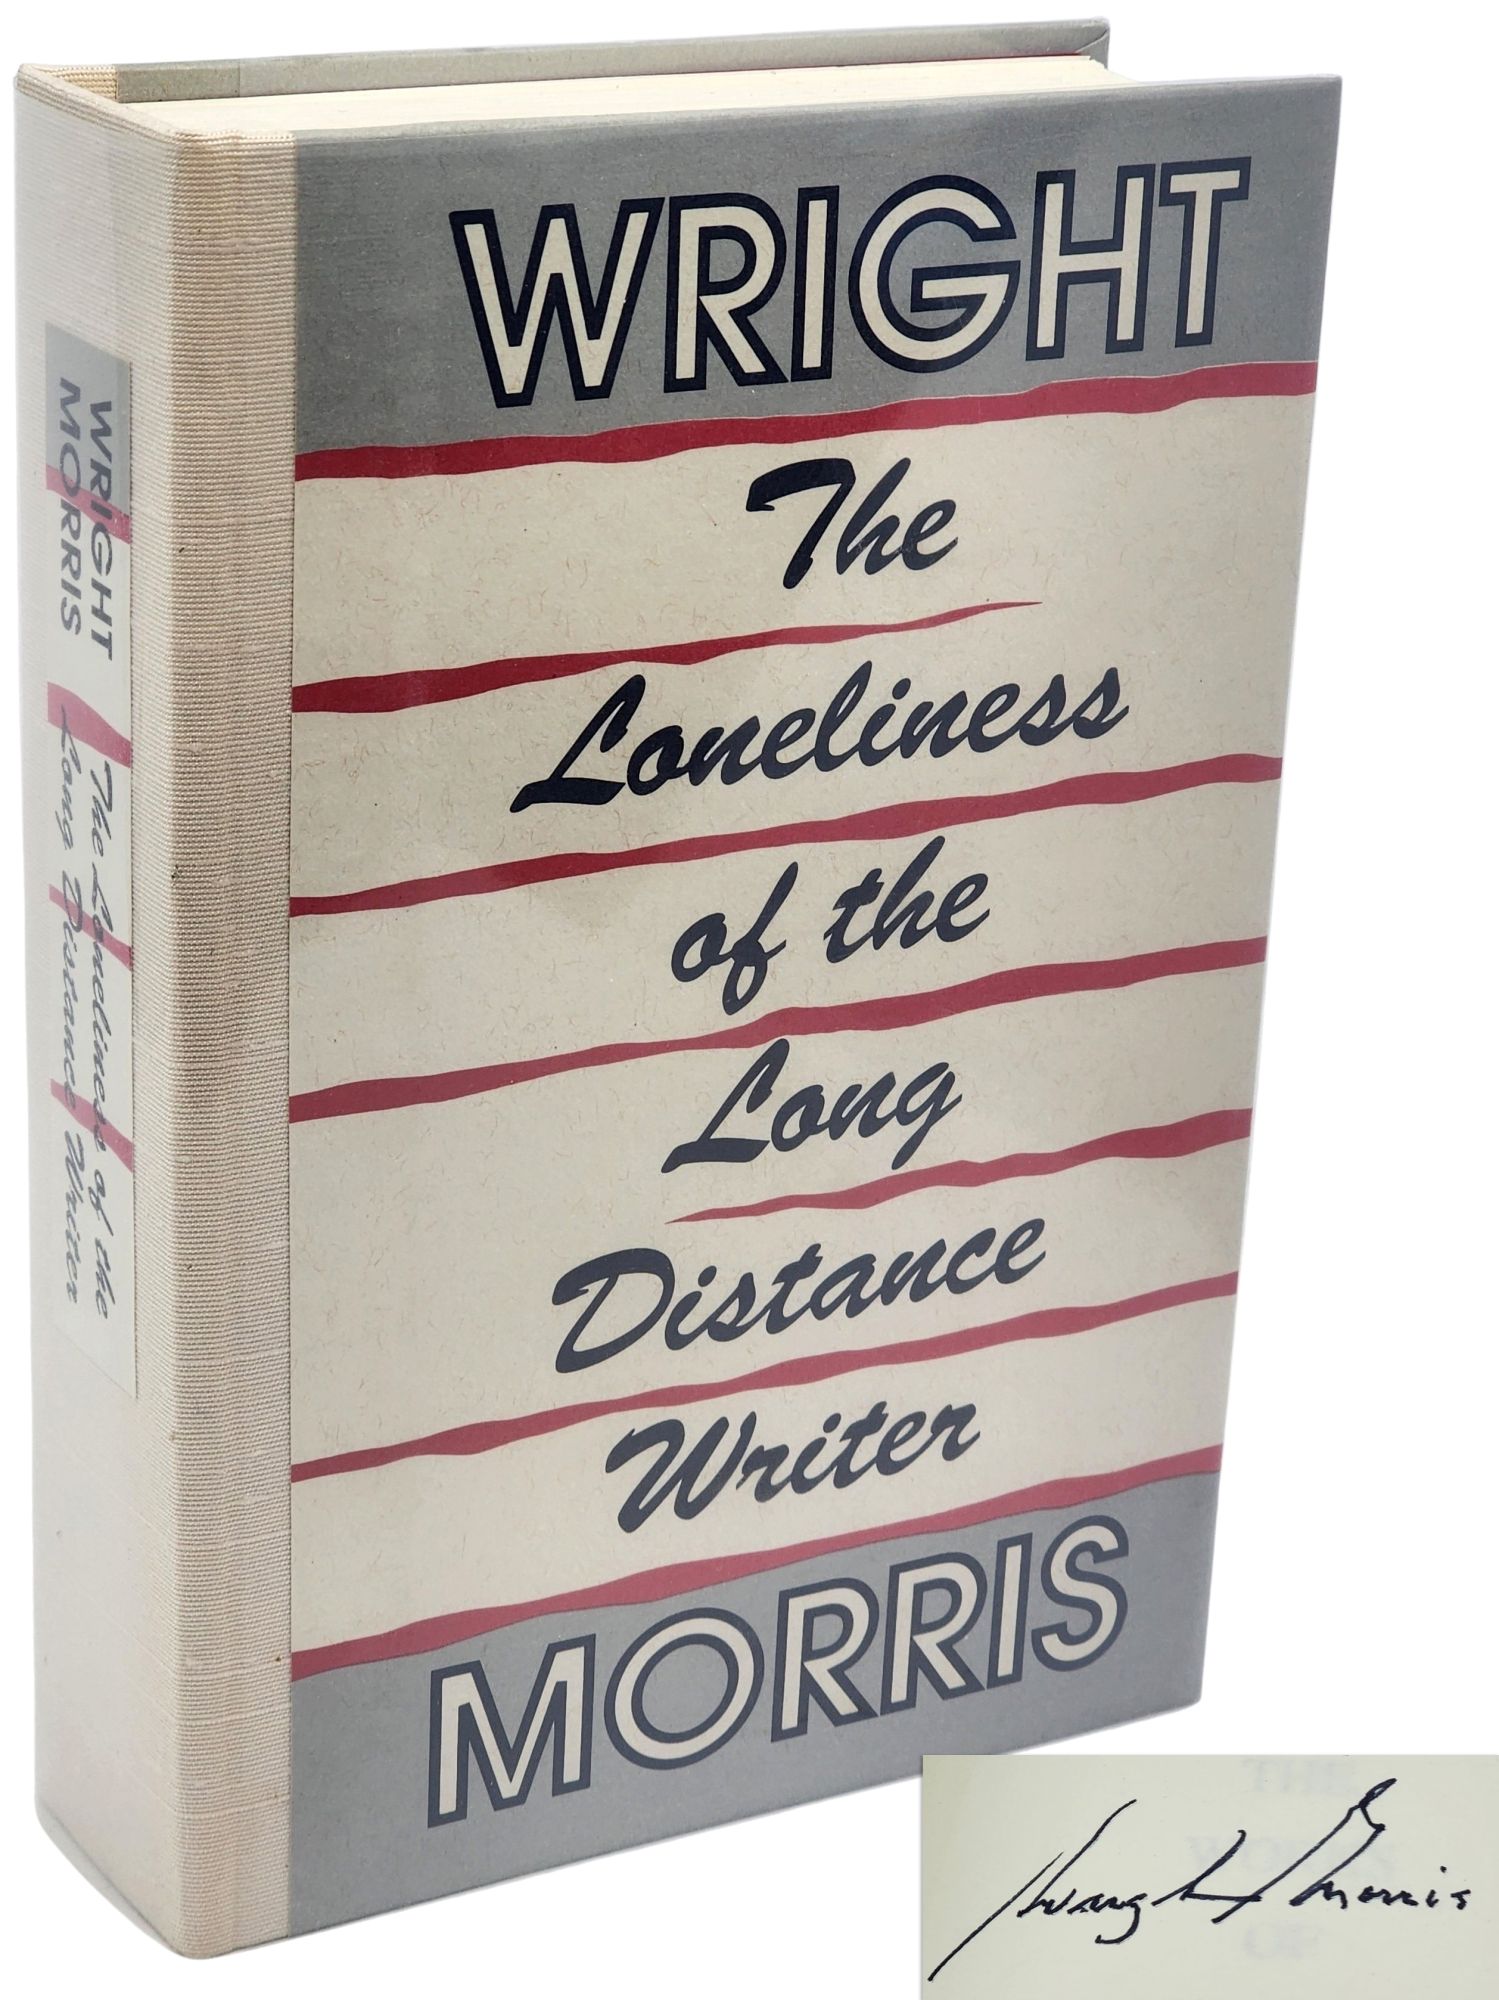 [Book #50950] THE LONELINESS OF THE LONG DISTANCE WRITER. Wright Morris.